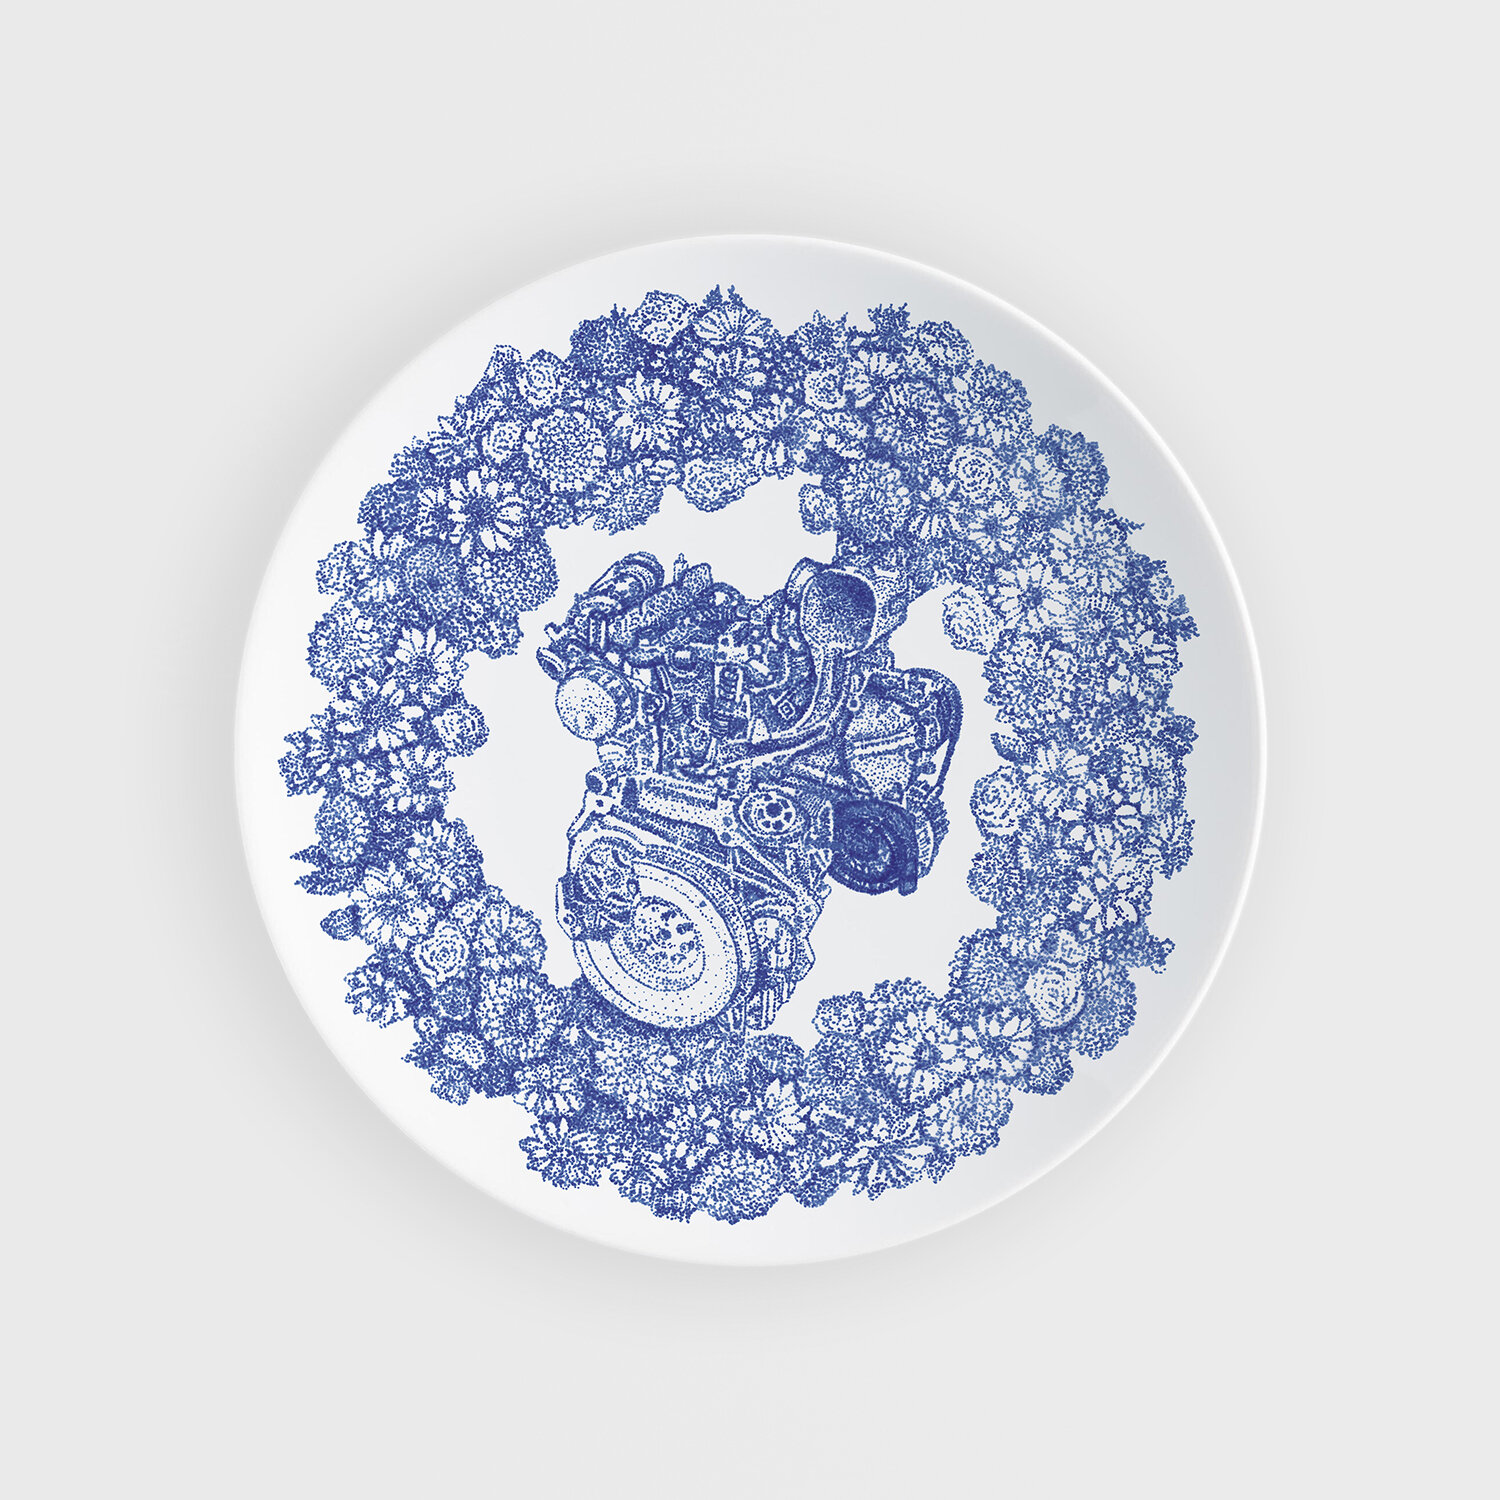 mathieu-frossard-flowering-plate-2018-glazed-stoneware-colored-decal-200x200x13mm-D.jpg